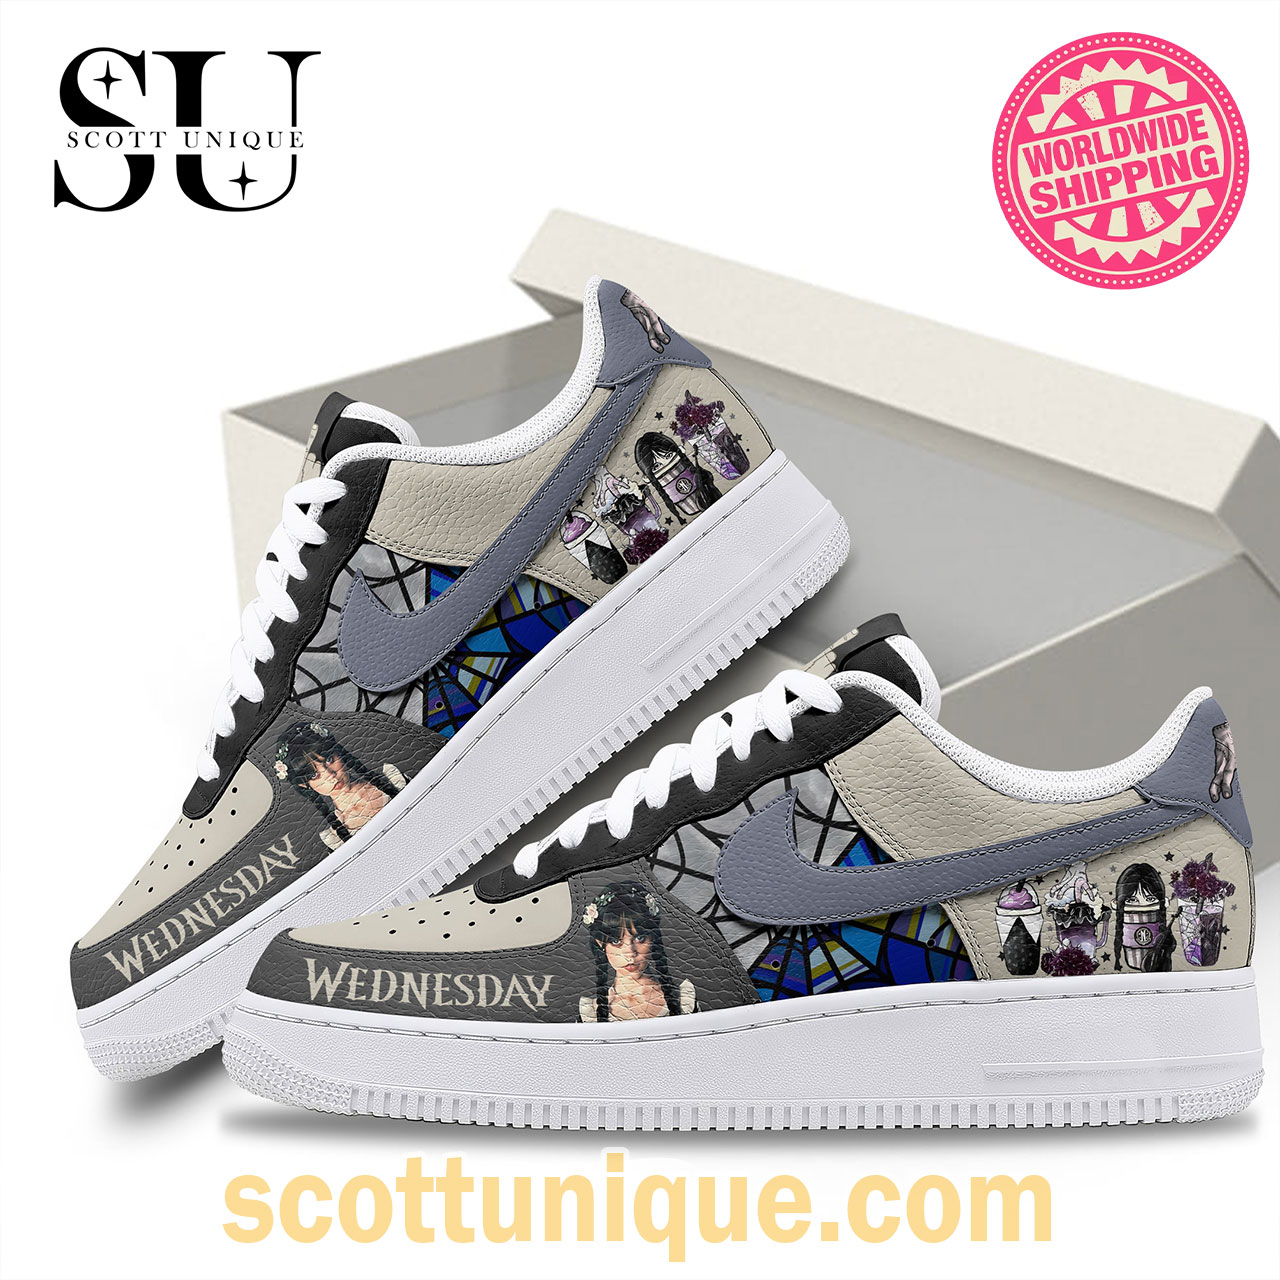 Wednesday Girl Premium Air Force 1 Shoes